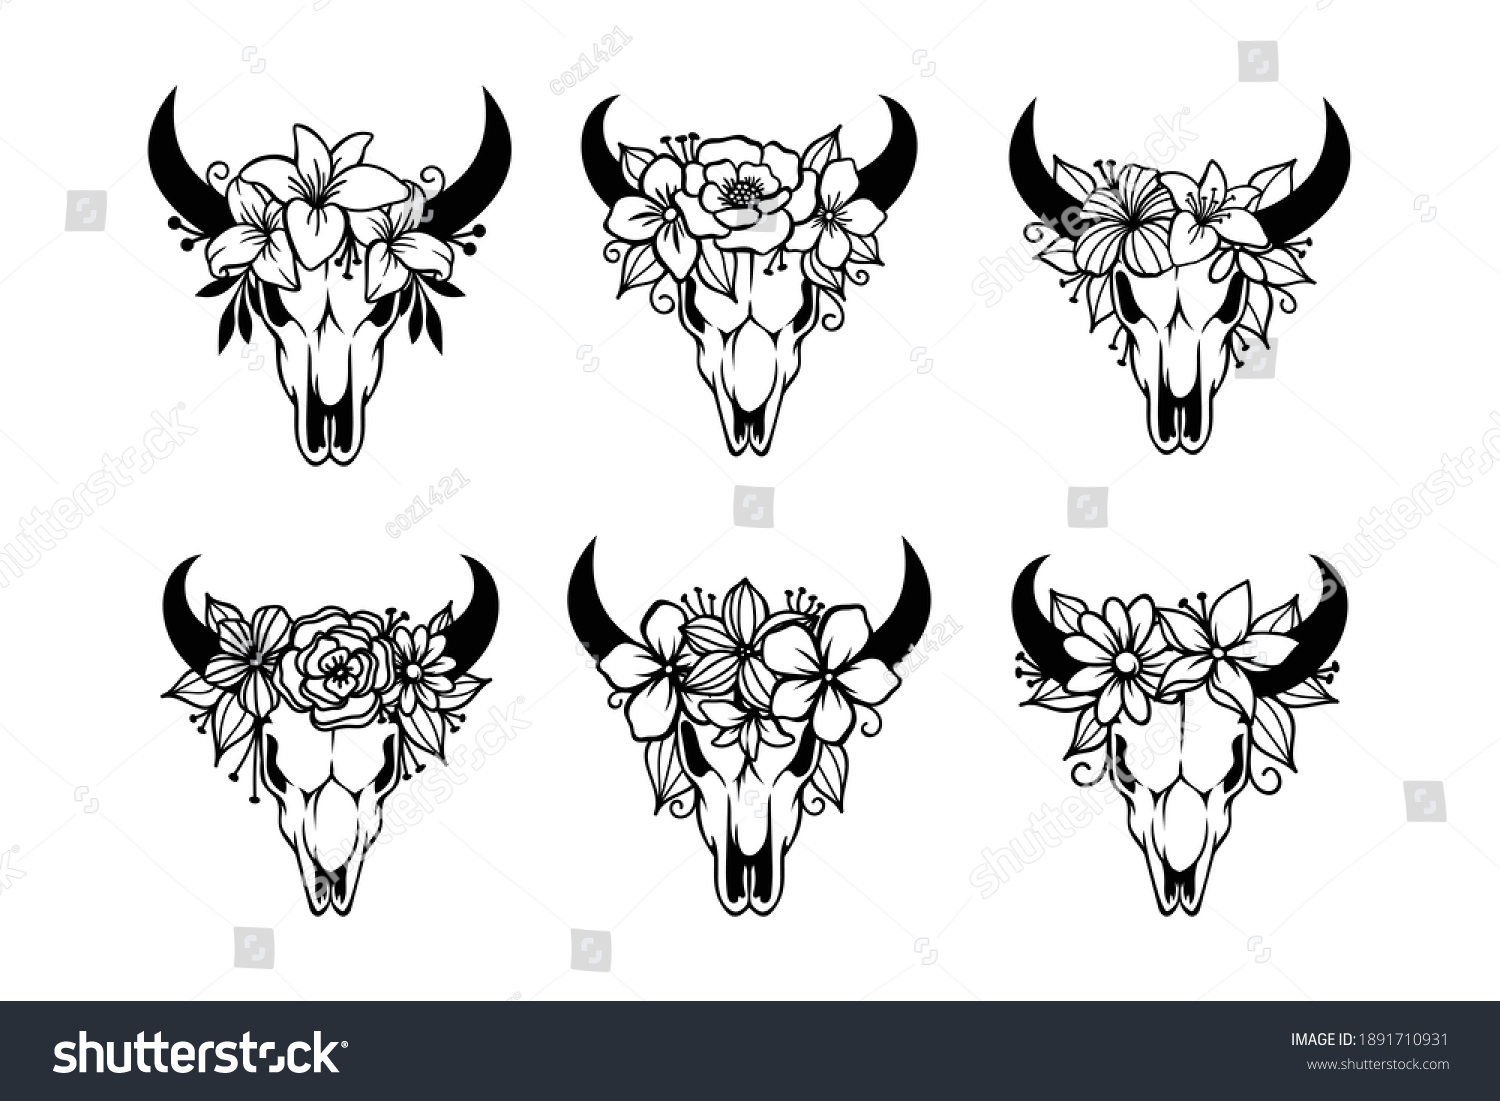 SVG of Skull of a cow with horns decorated with flowers svg